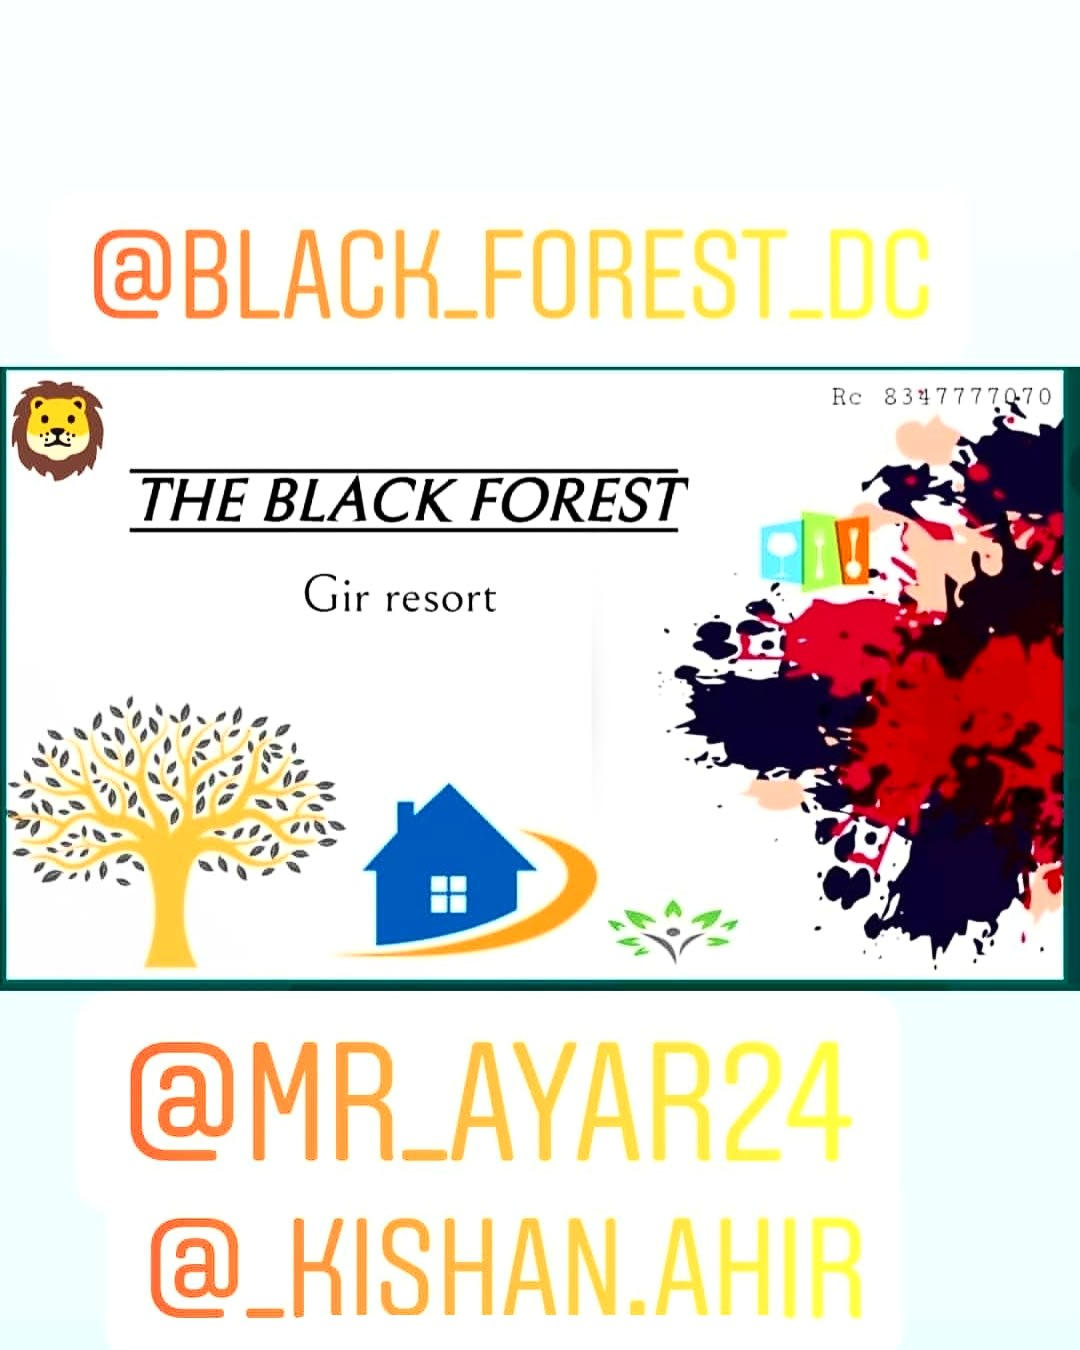 The Black Forest